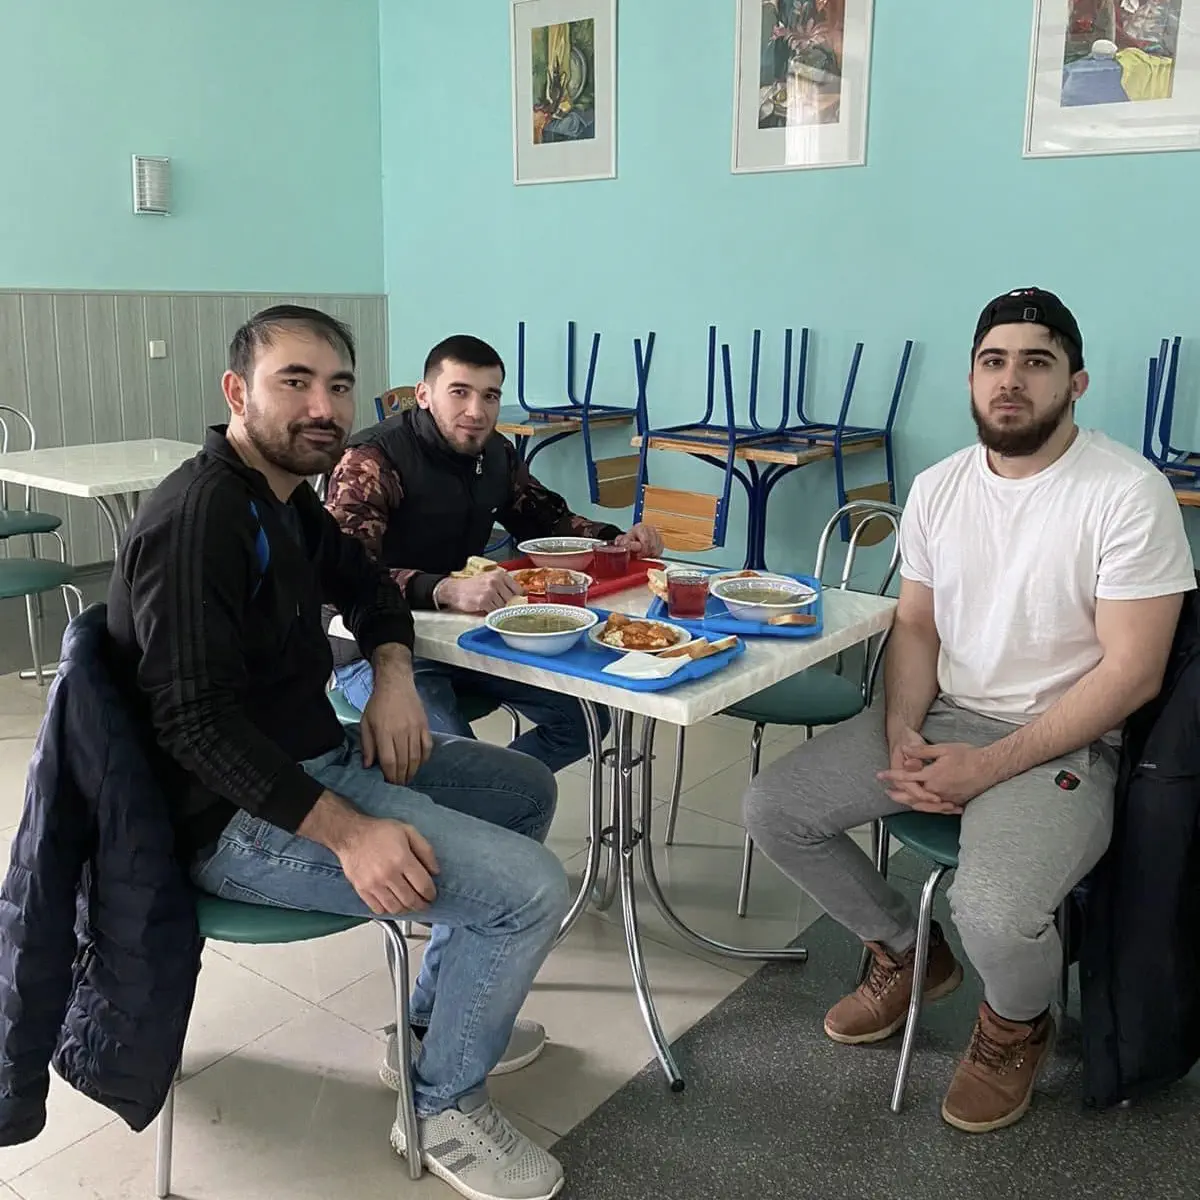 Polytechnic provides free meals to staff and residents of the campus